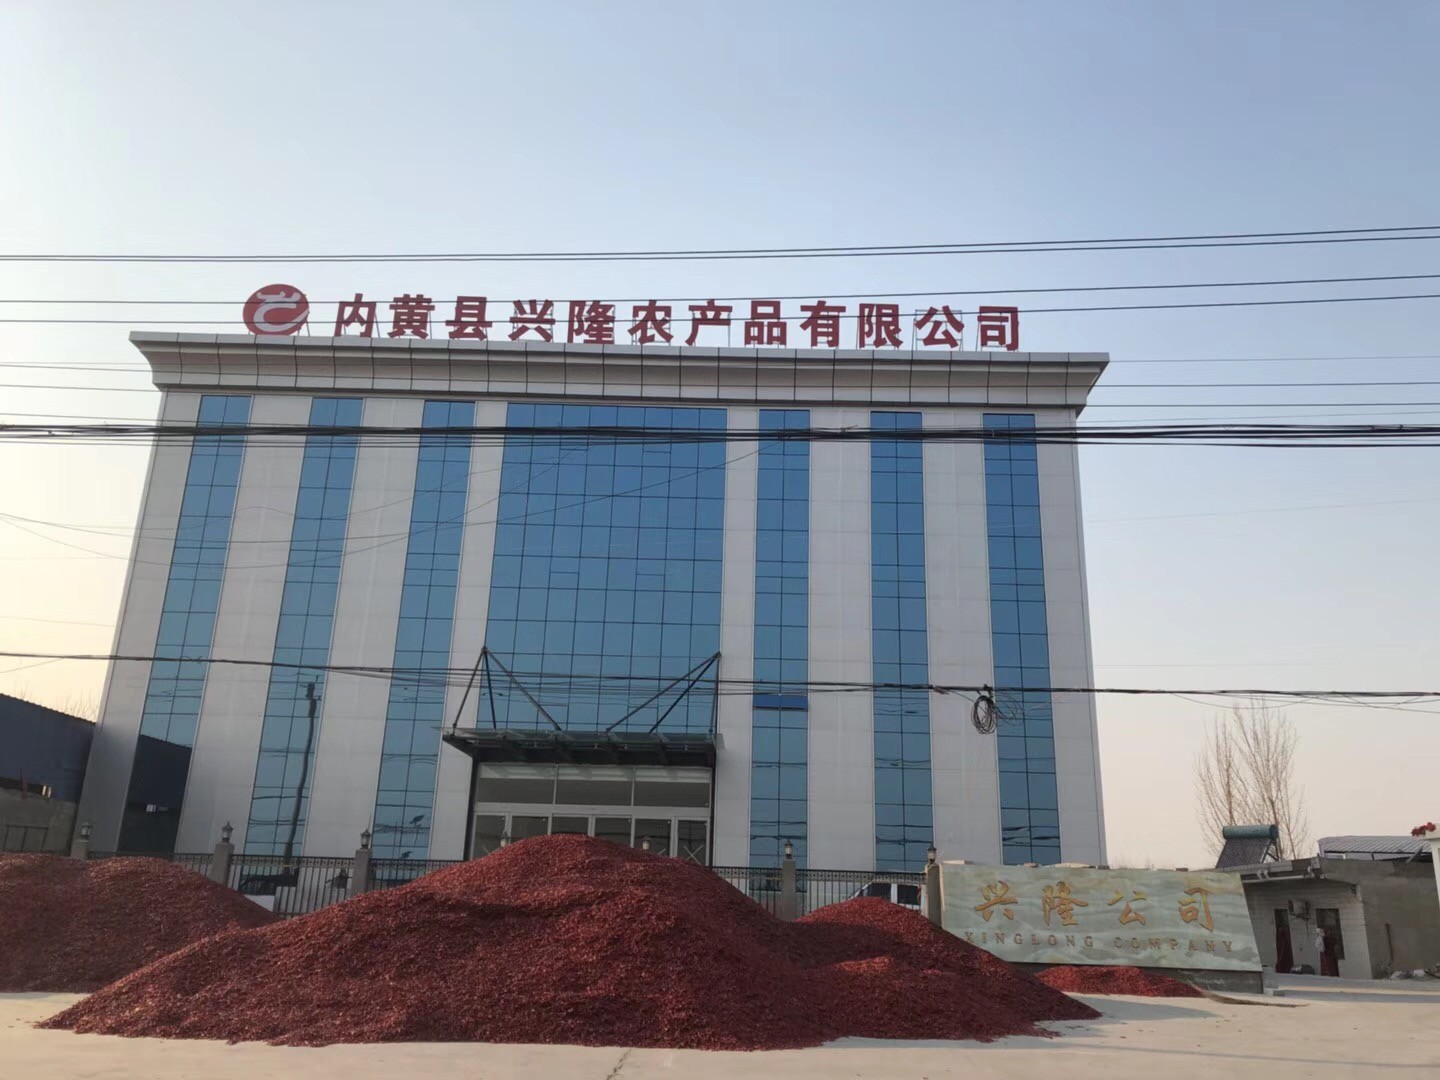 China Neihuang Xinglong Agricultural Products Co. Ltd